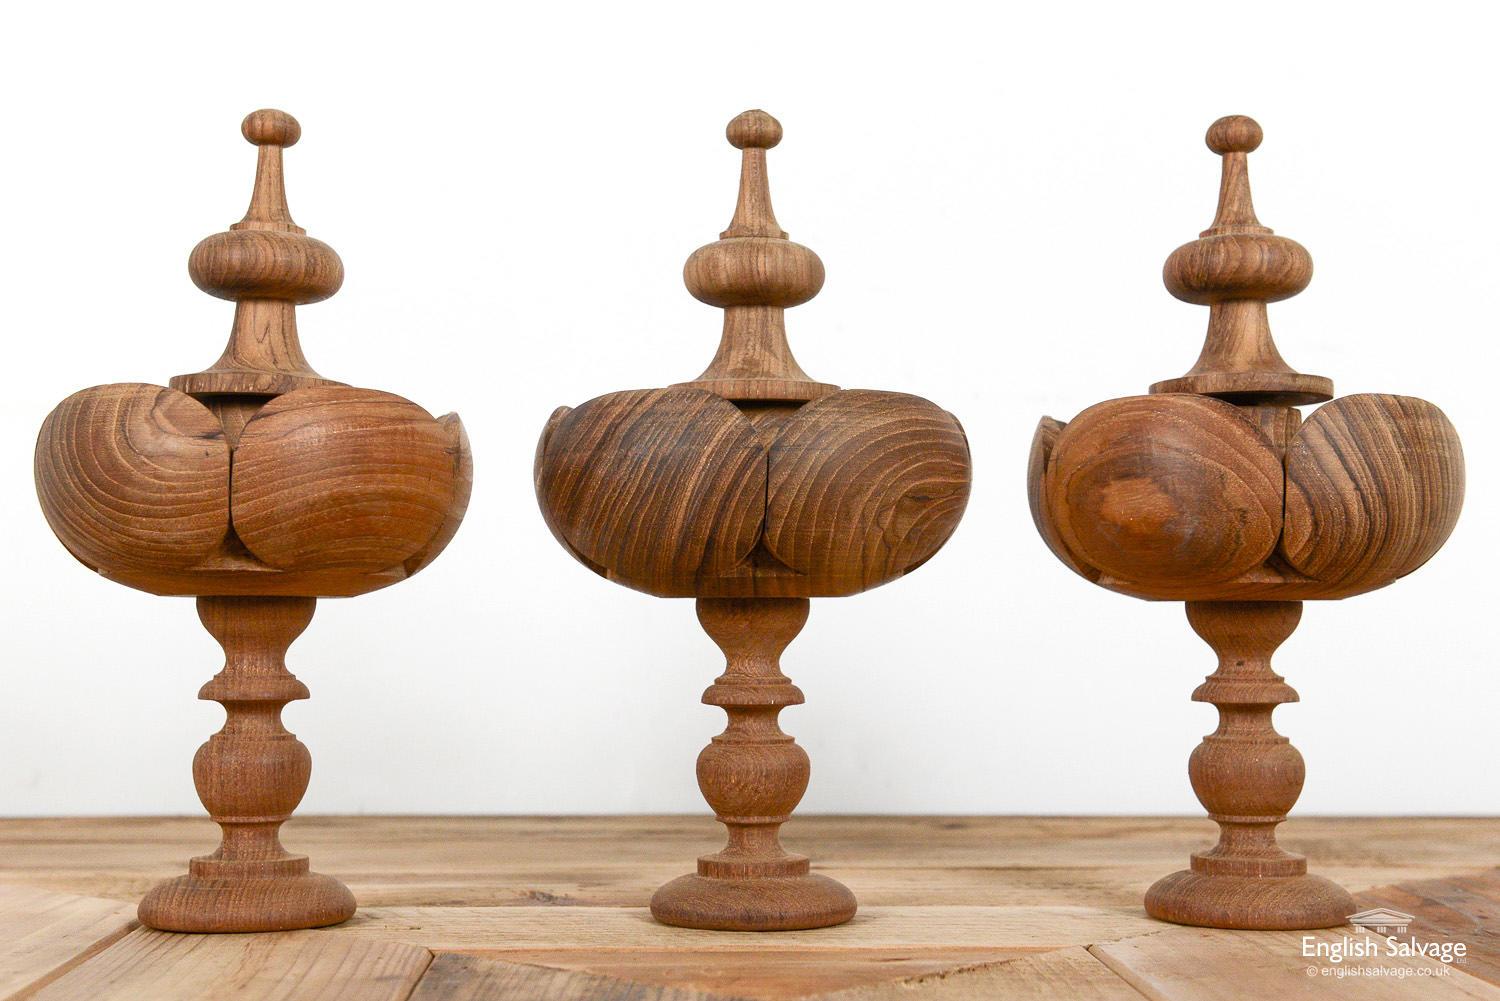 Substantial hand-turned teak curtain finials in a striking design. Raw wood finish allows user to easily apply their chosen finish. 

Price is per pair.